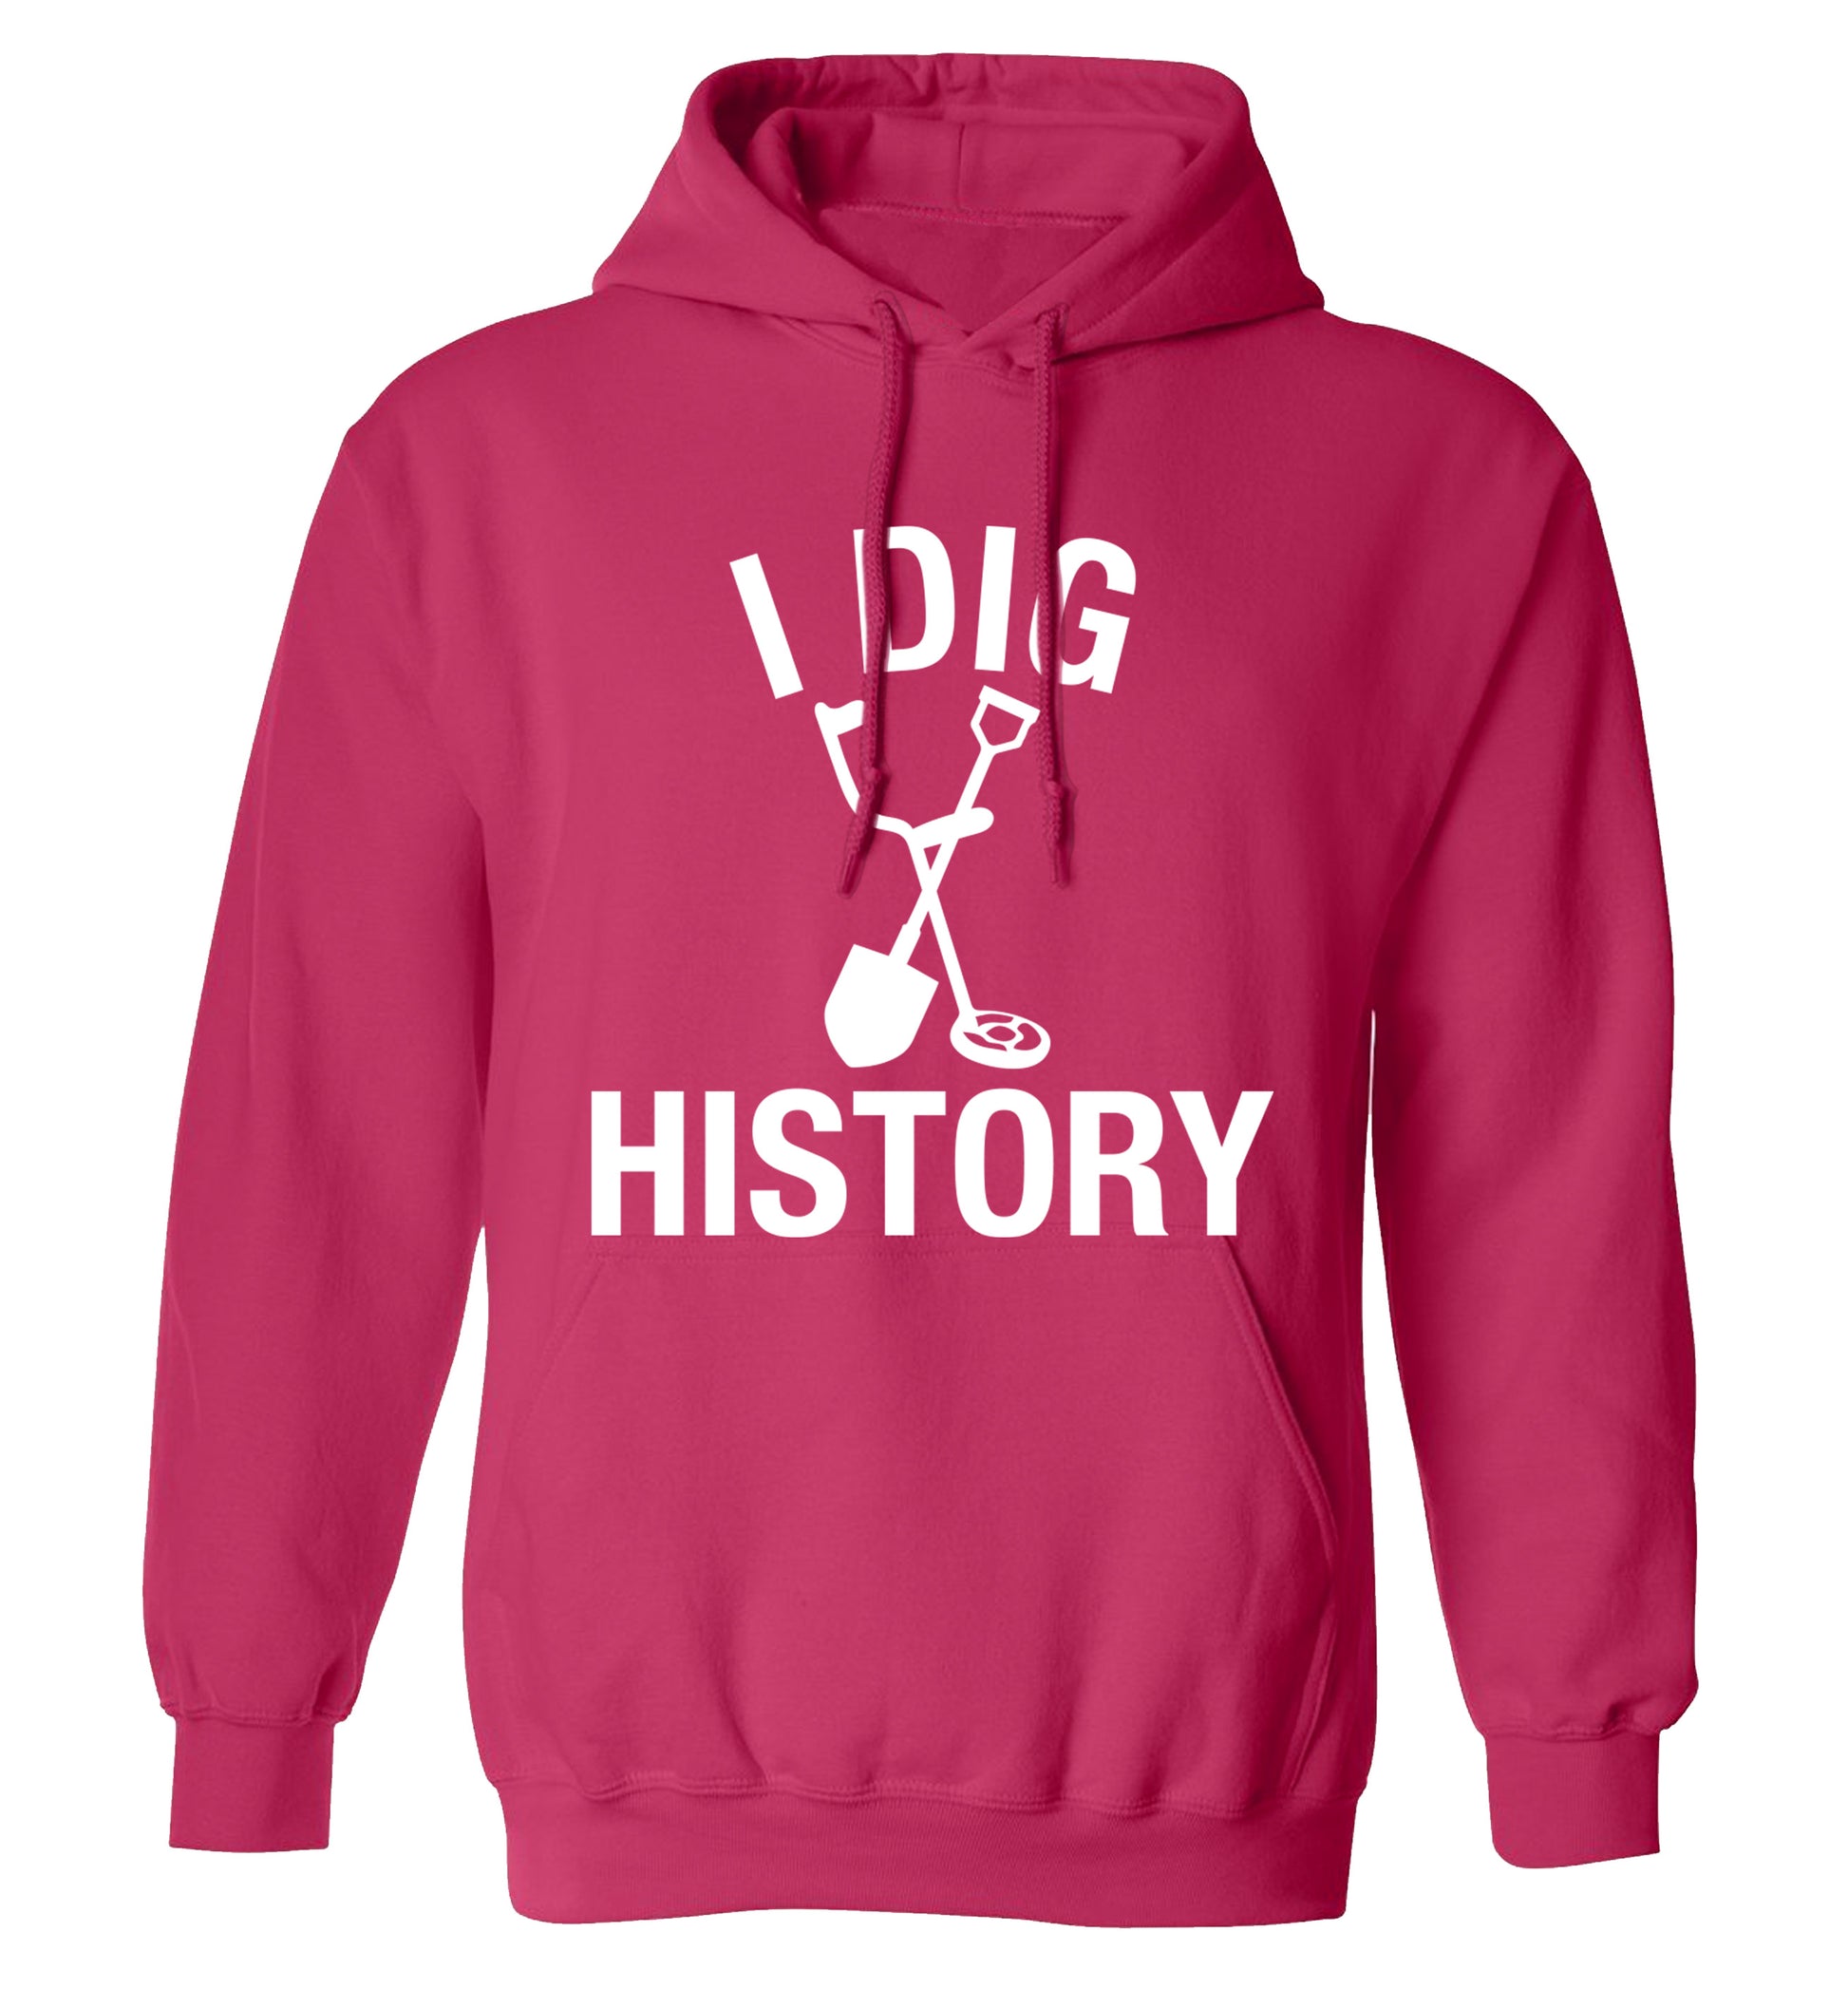 I dig history adults unisex pink hoodie 2XL